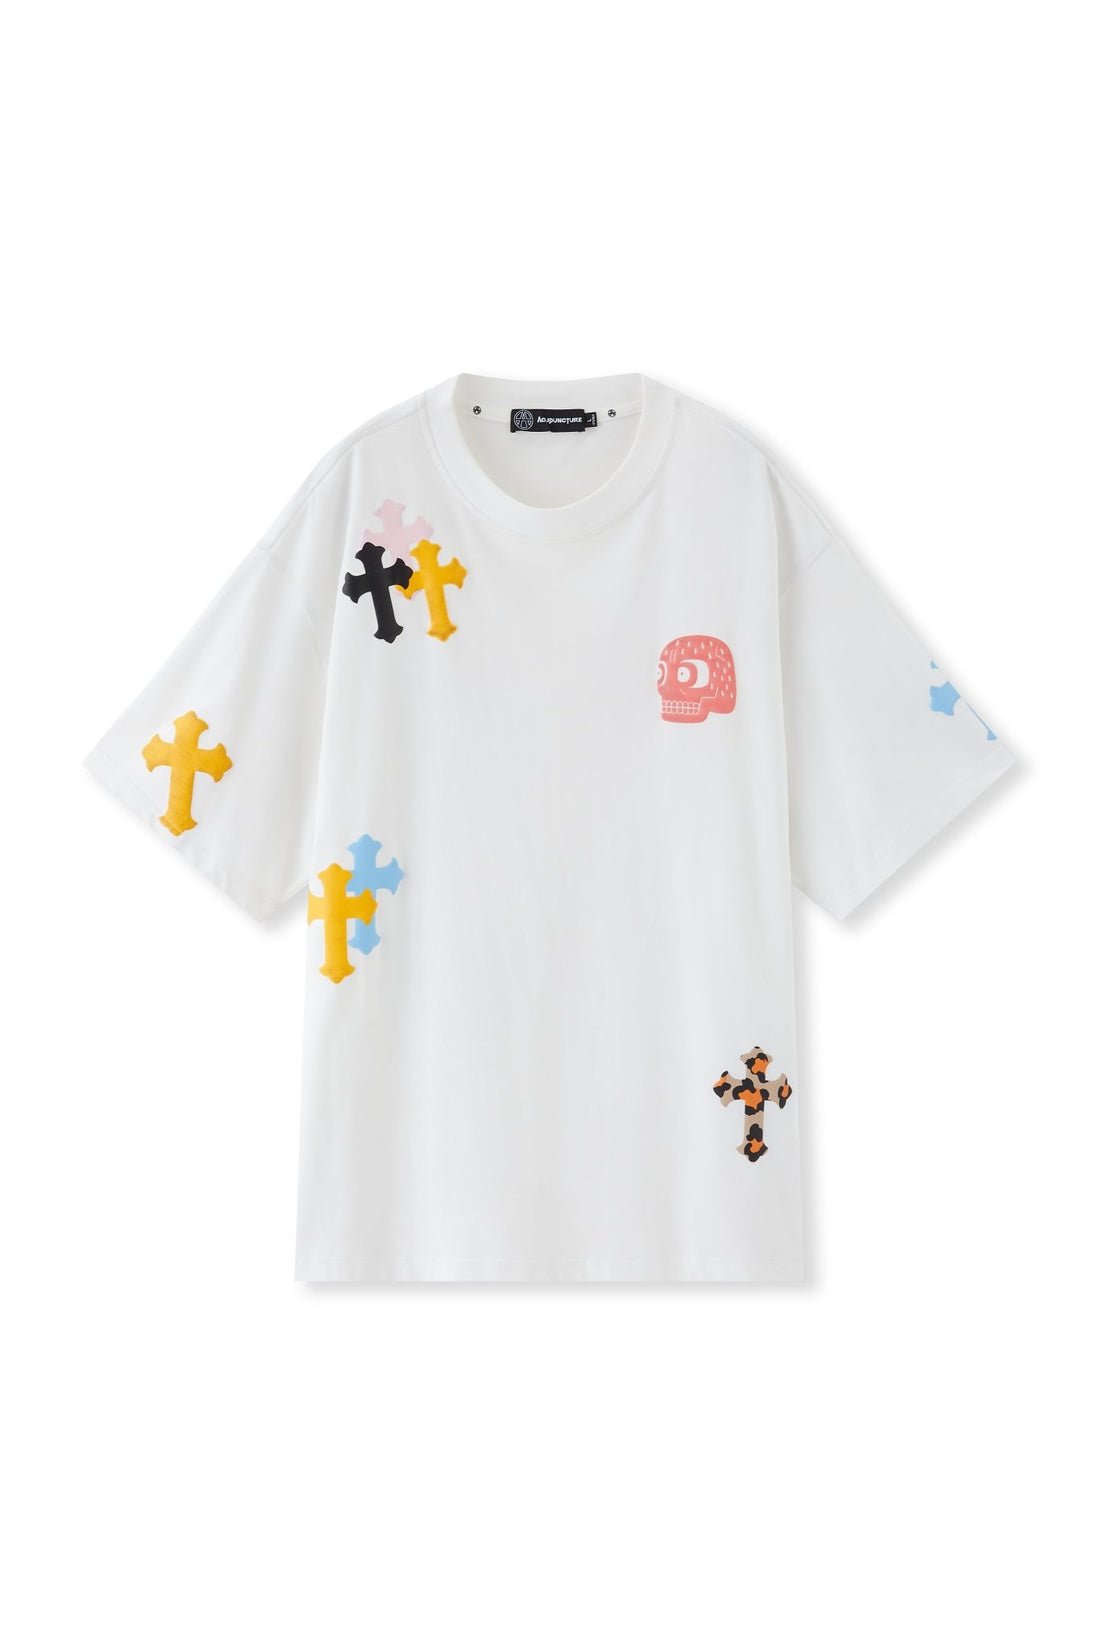 CROSS TSHIRT WHITE Acupuncture